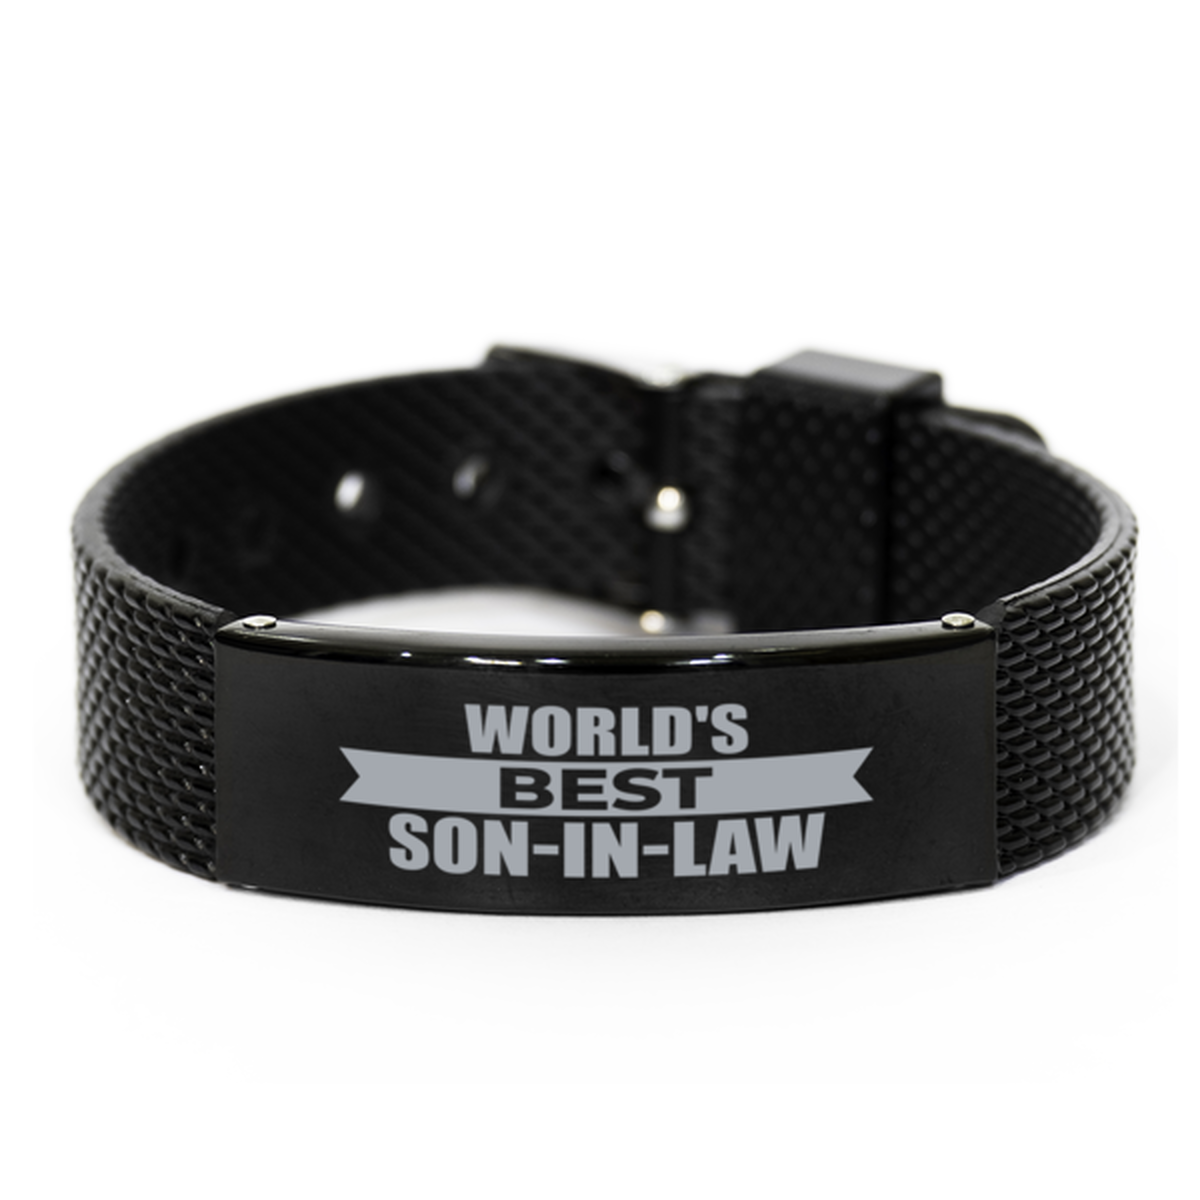 World's Best Son-in-law Gifts, Gag Engraved Bracelet For Son-in-law, Best Family Gifts For Men